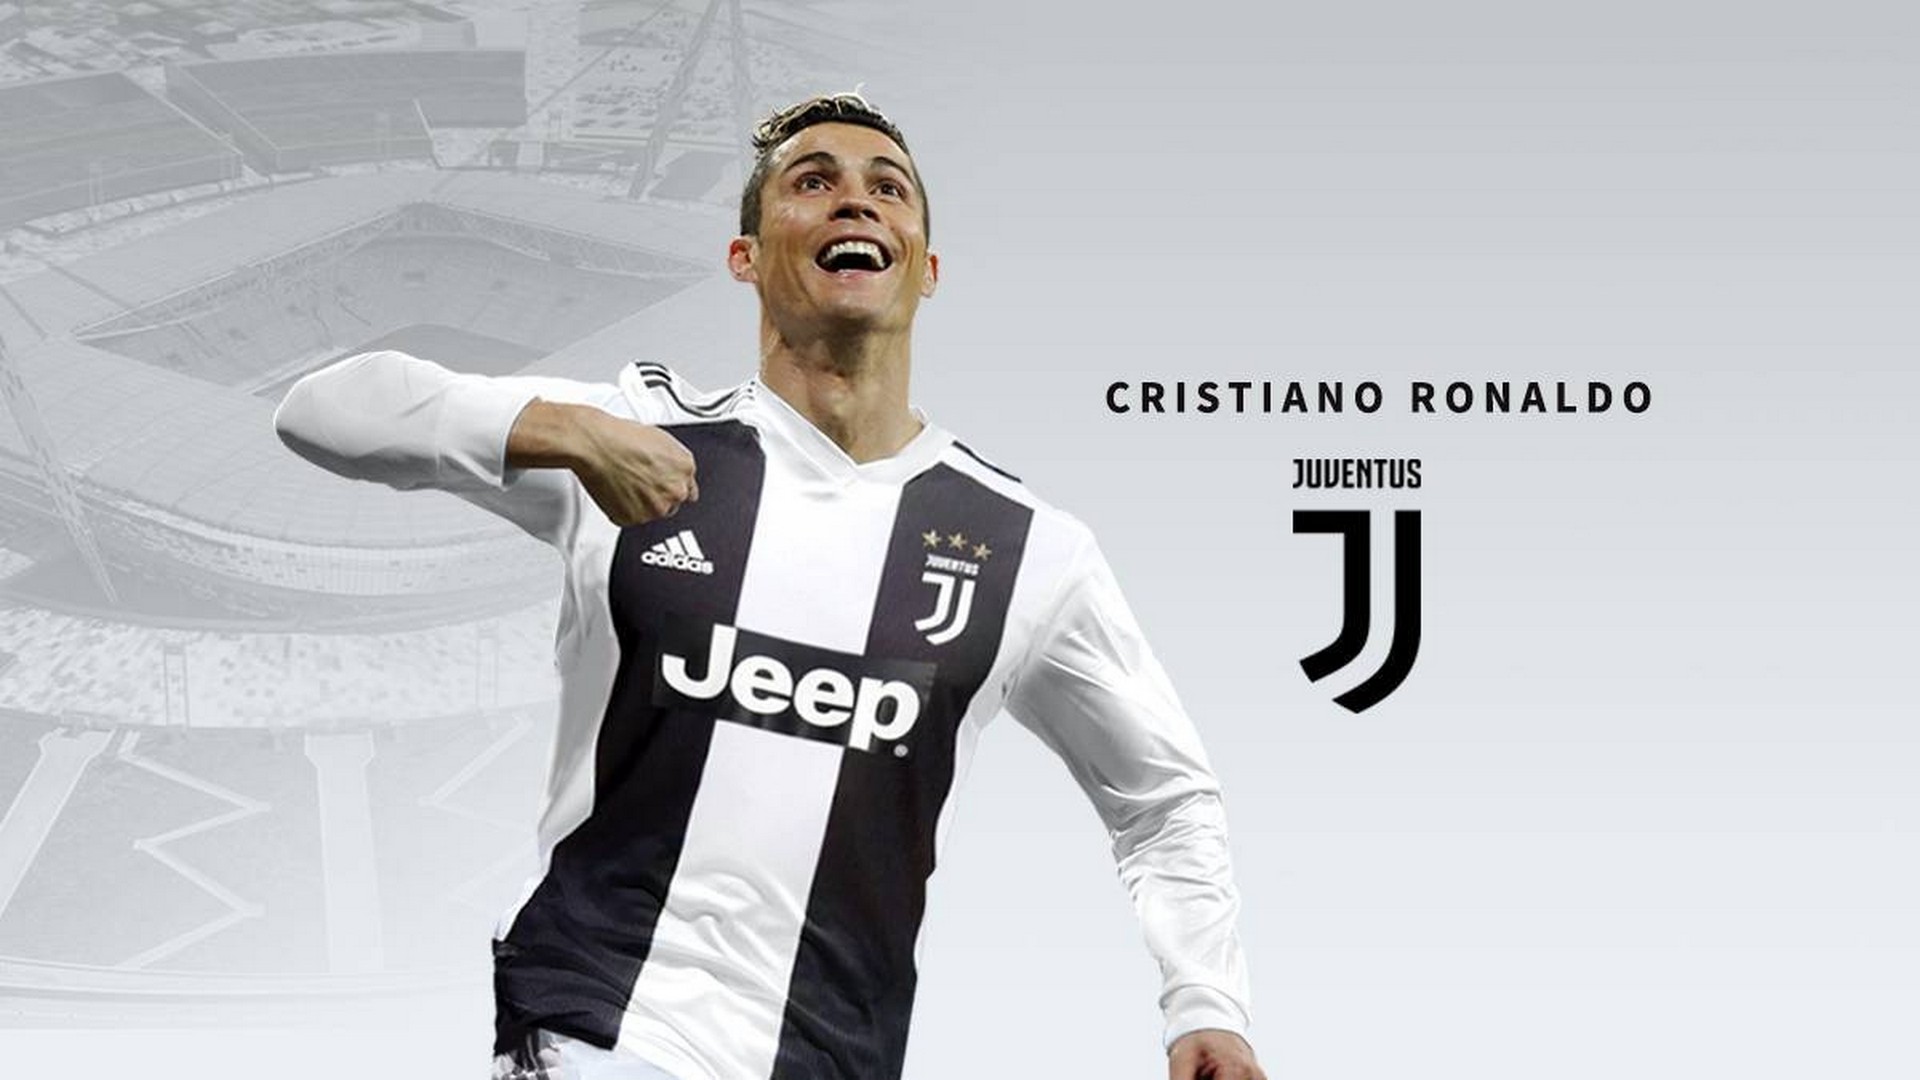 C Ronaldo Juventus HD Wallpaper with image resolution 1920x1080 pixel. You can make this wallpaper for your Desktop Computer Backgrounds, Mac Wallpapers, Android Lock screen or iPhone Screensavers